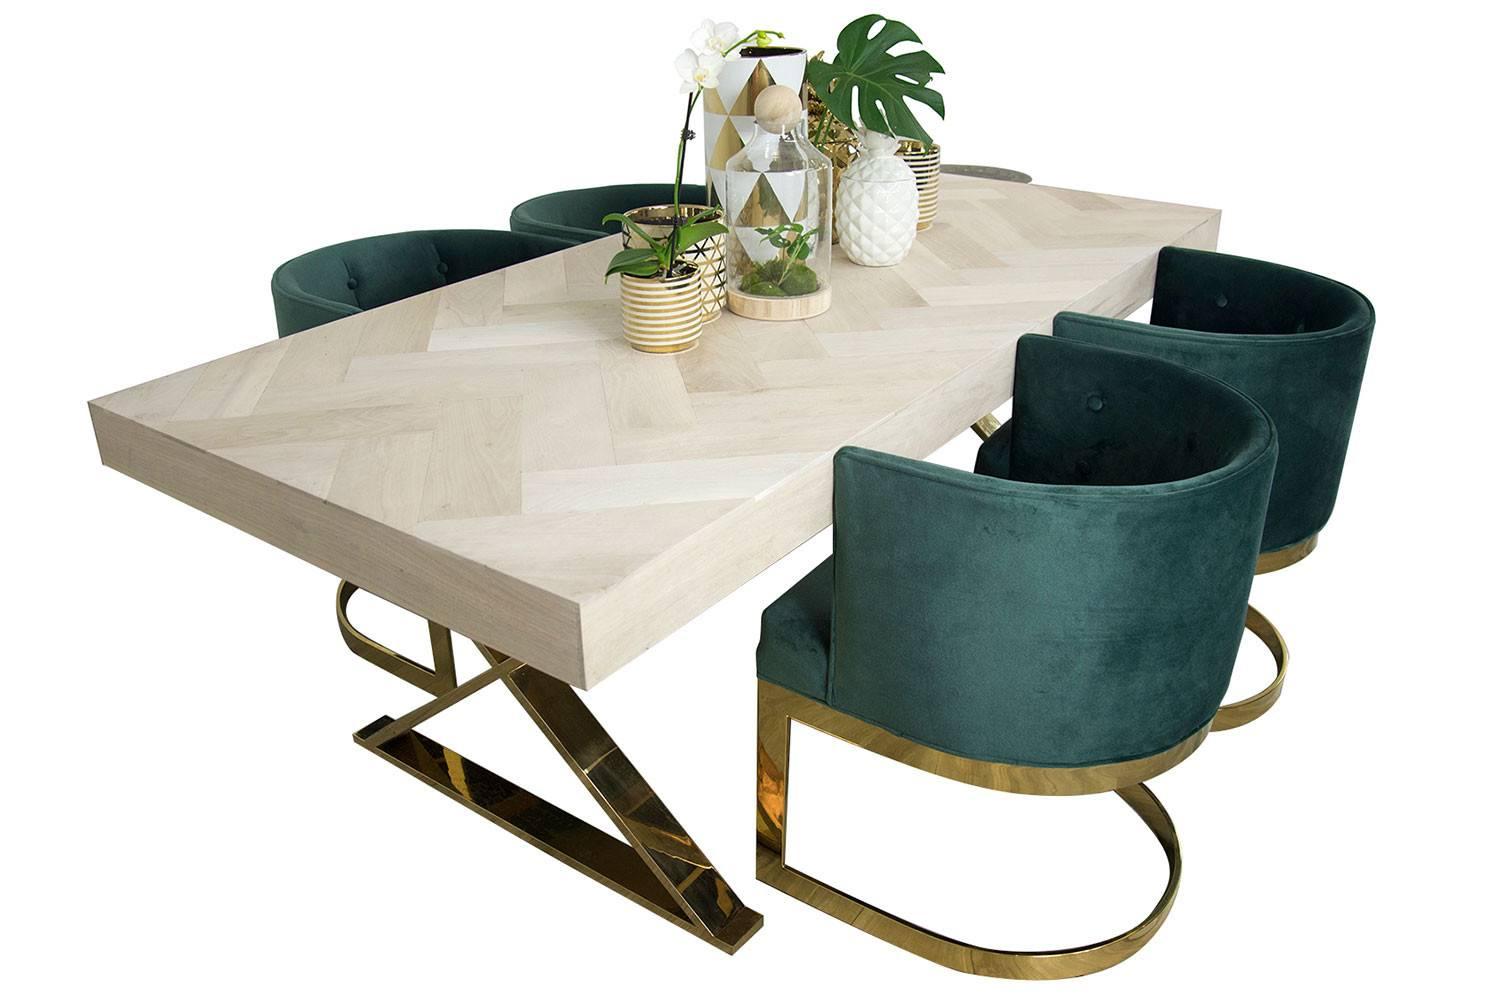 The Amalfi dining table is a wonderful addition to our Amalfi Collection. The top is made of solid bleached walnut that is carefully laid out in a herringbone pattern. The table is supported with two elegant brass X-legs.

Measures: 7' long / 38